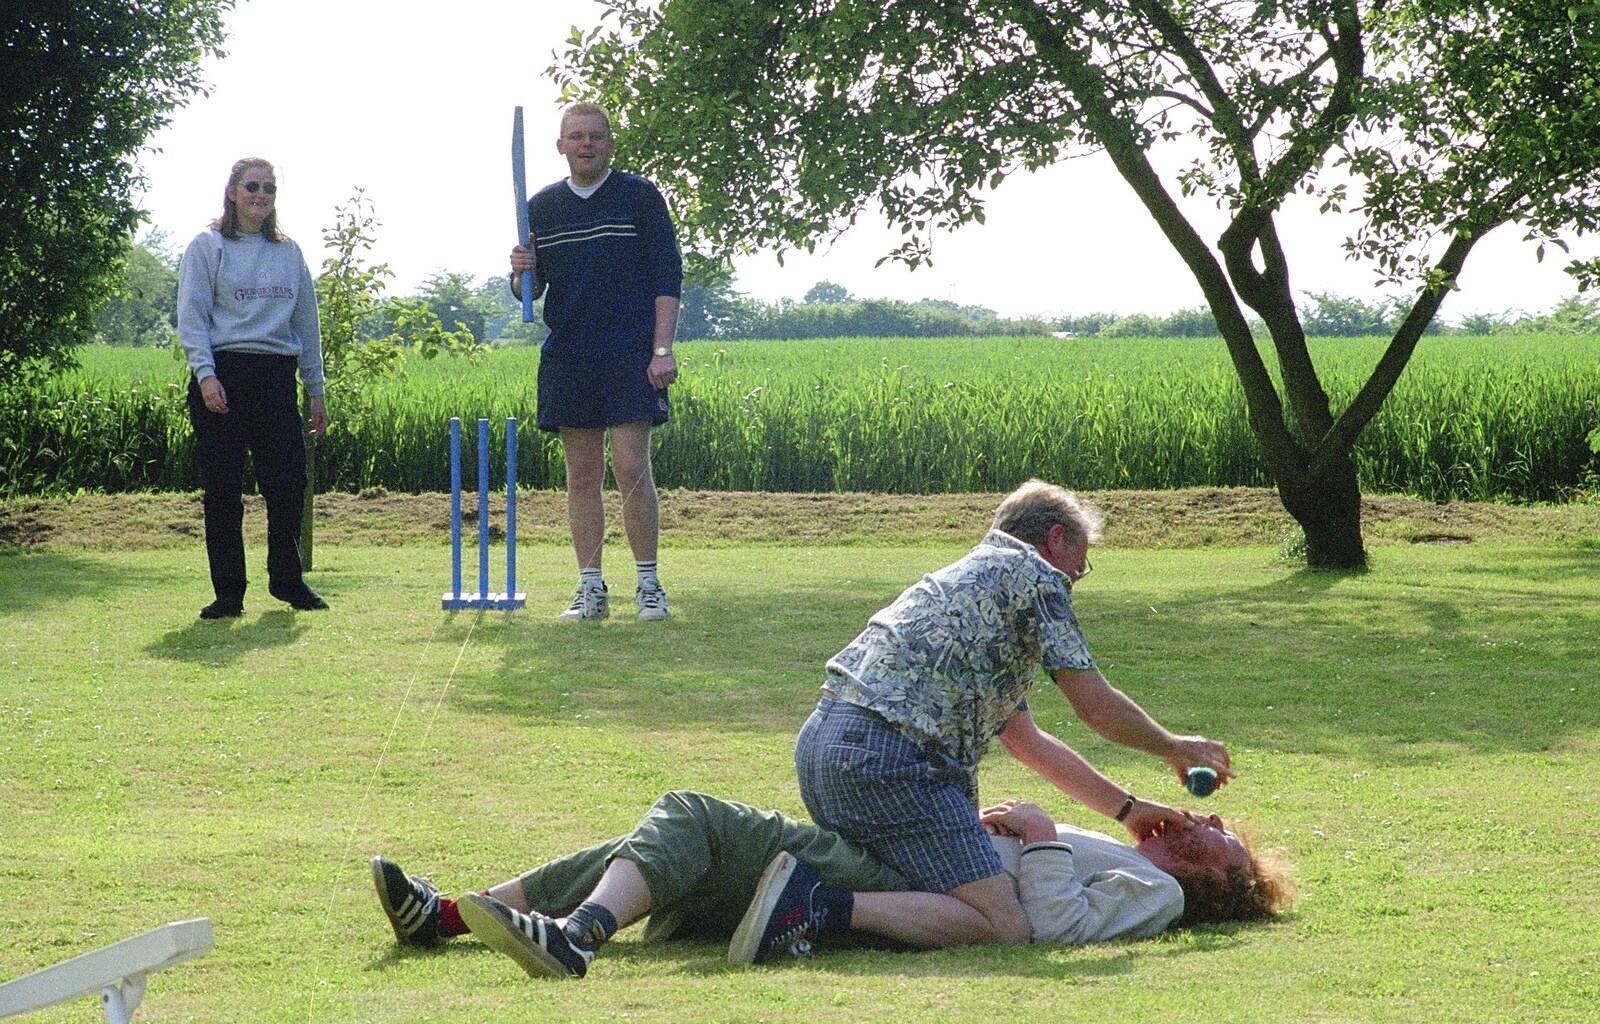 John Willy feeds the ball to Wavy from Colin and Jill's Barbeque, Suffolk - 28th May 2000